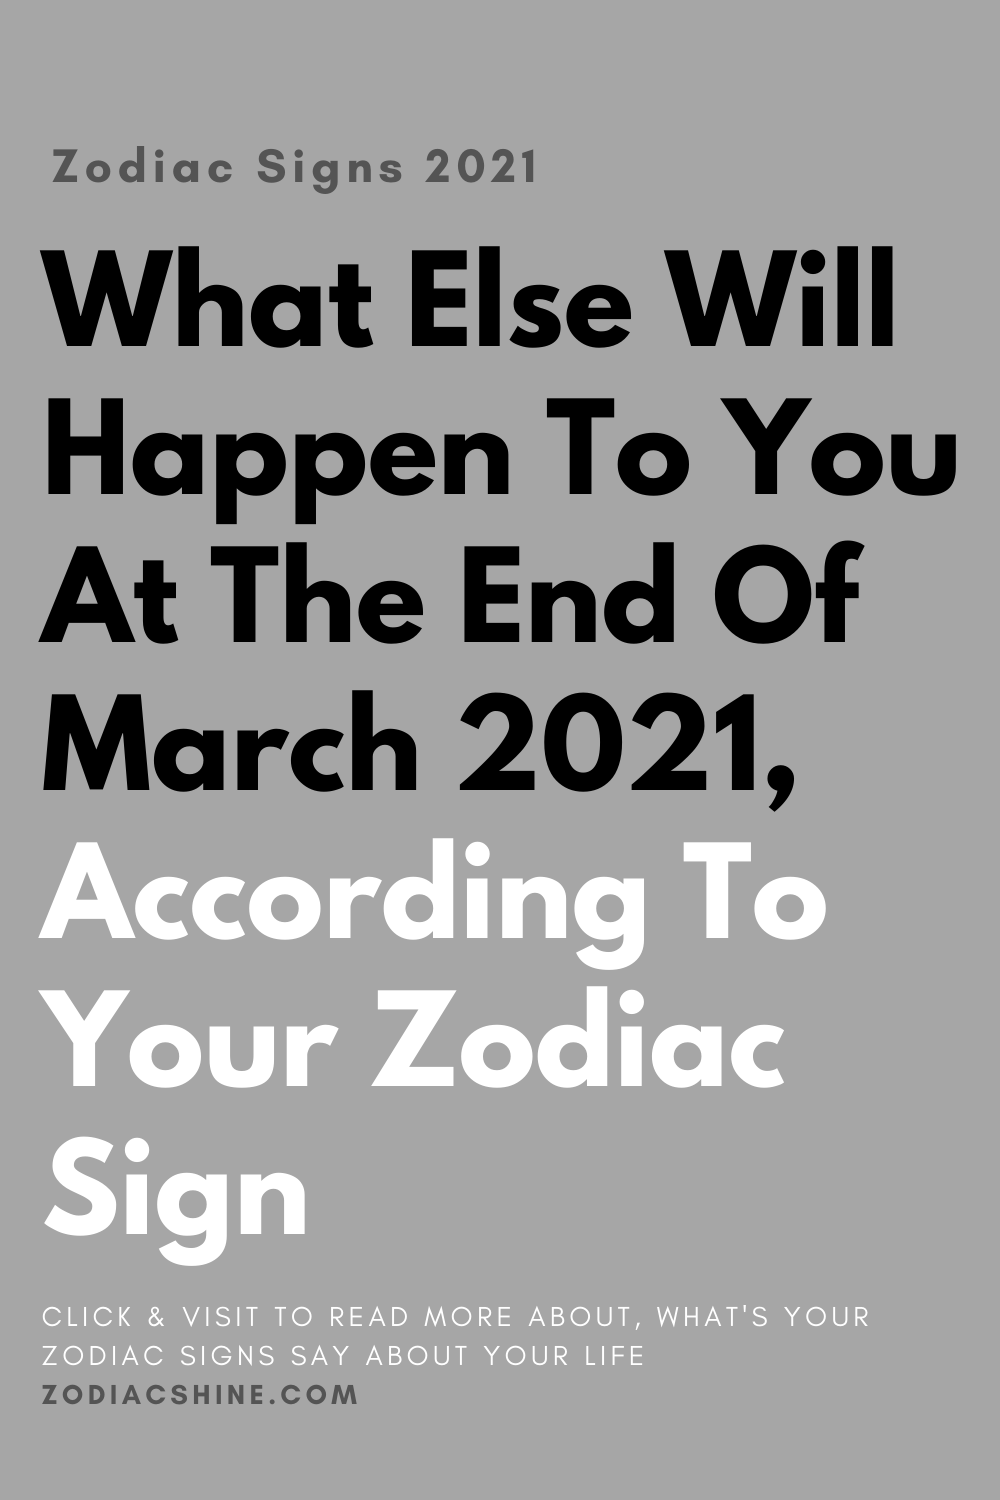 What Else Will Happen To You At The End Of March 2021, According To Your Zodiac Sign